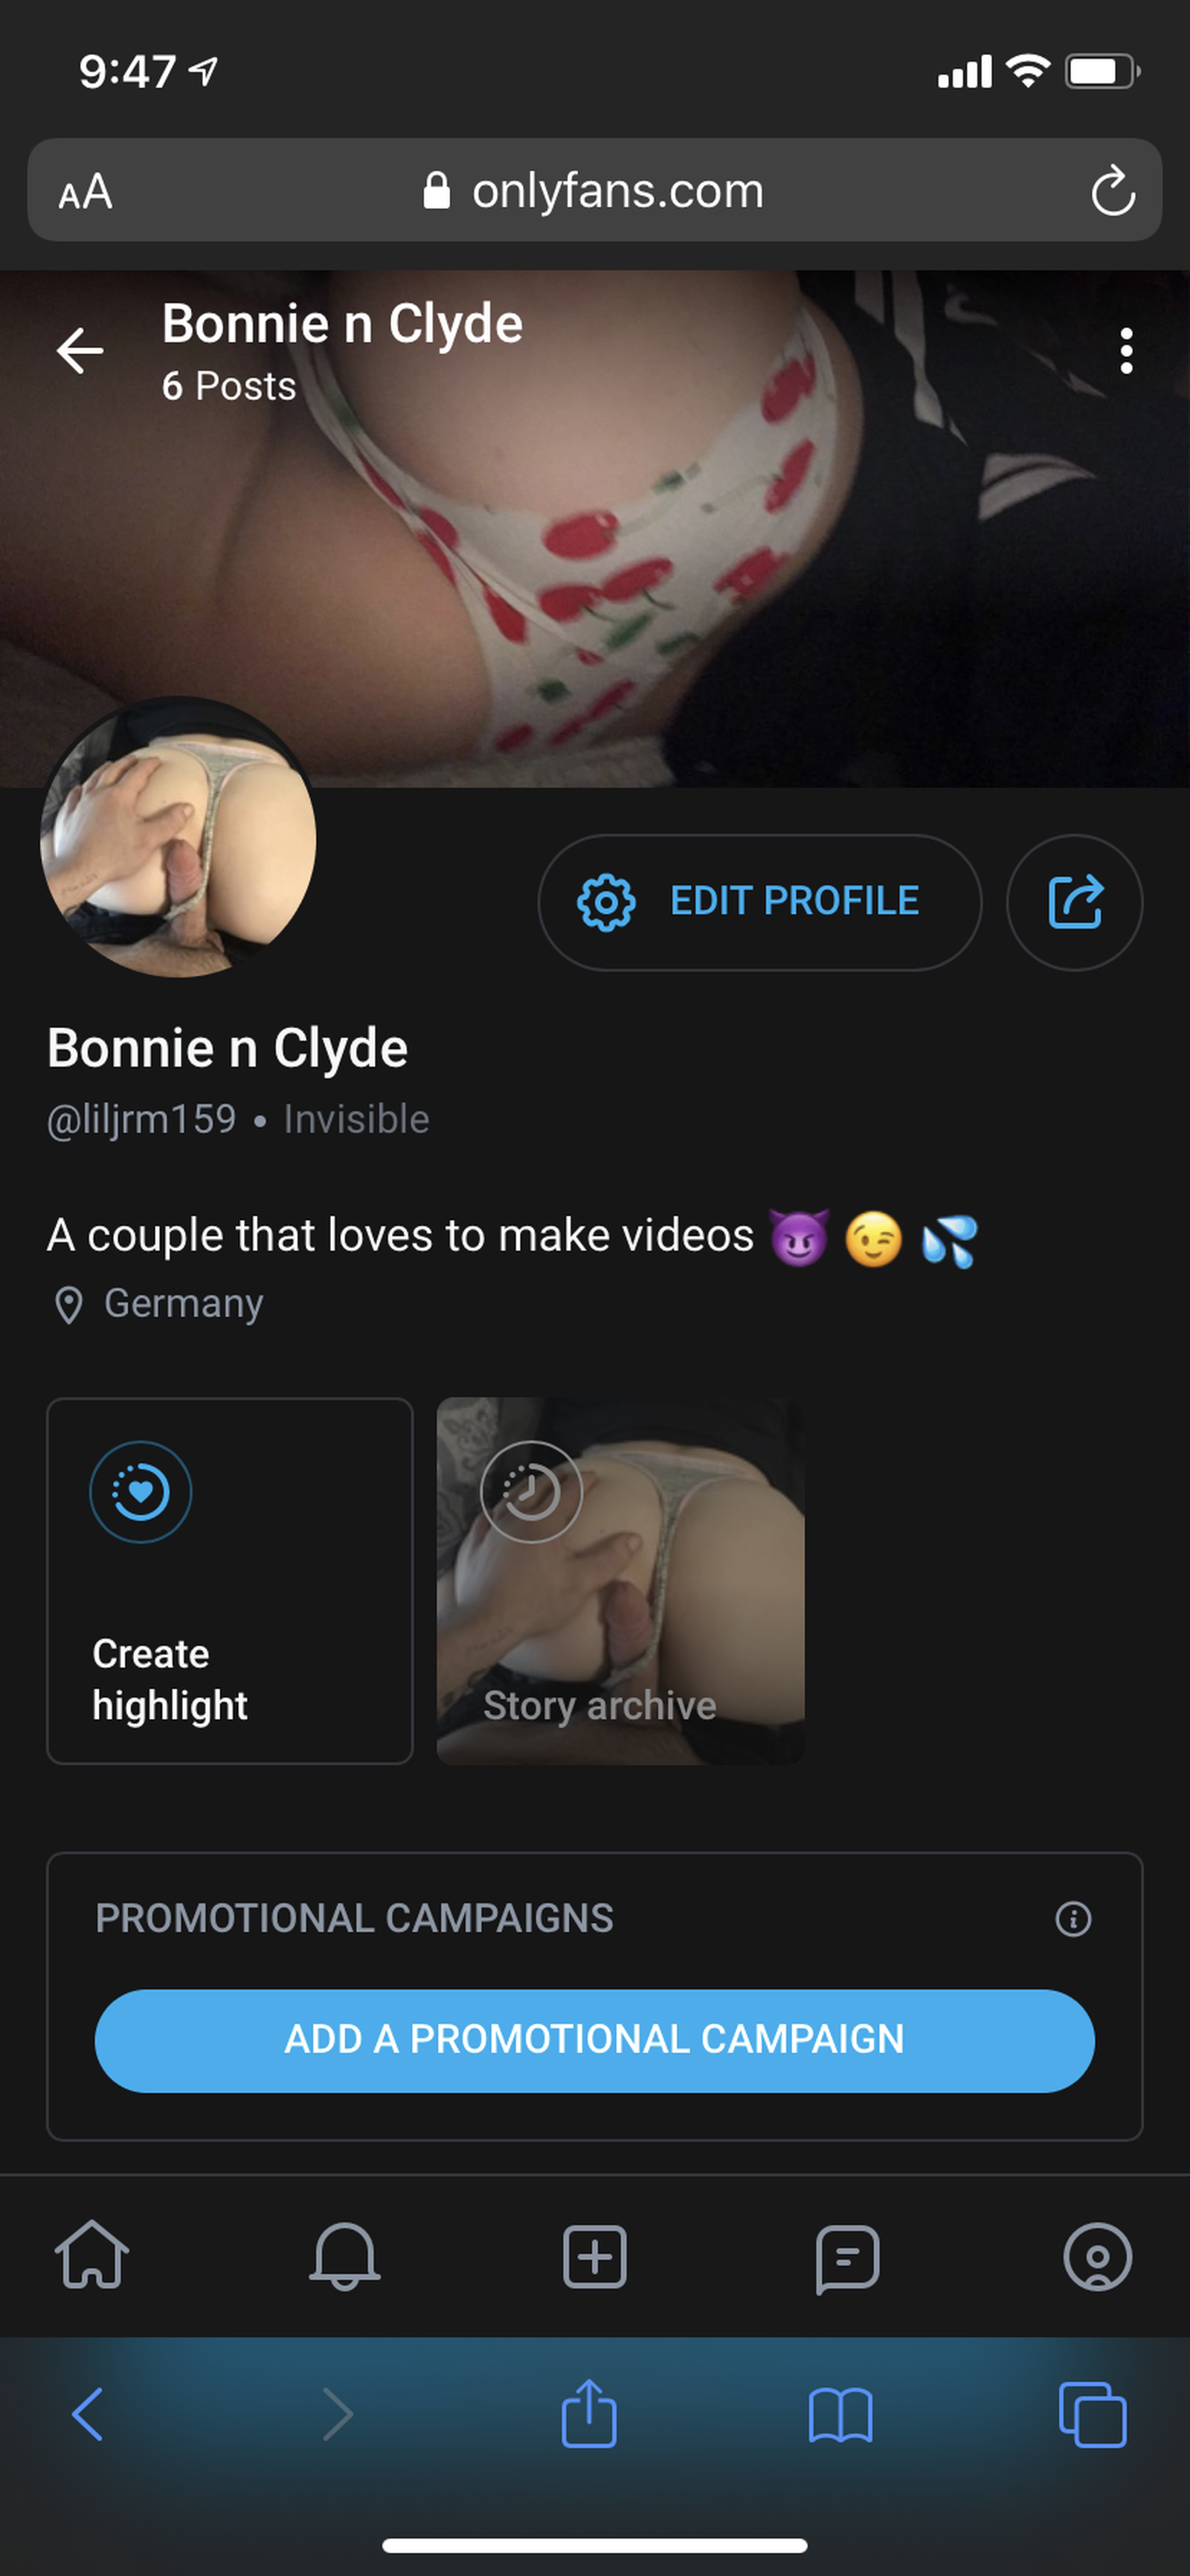 Photo by Bonnie n clyde with the username @liljman58,  August 27, 2020 at 2:22 AM